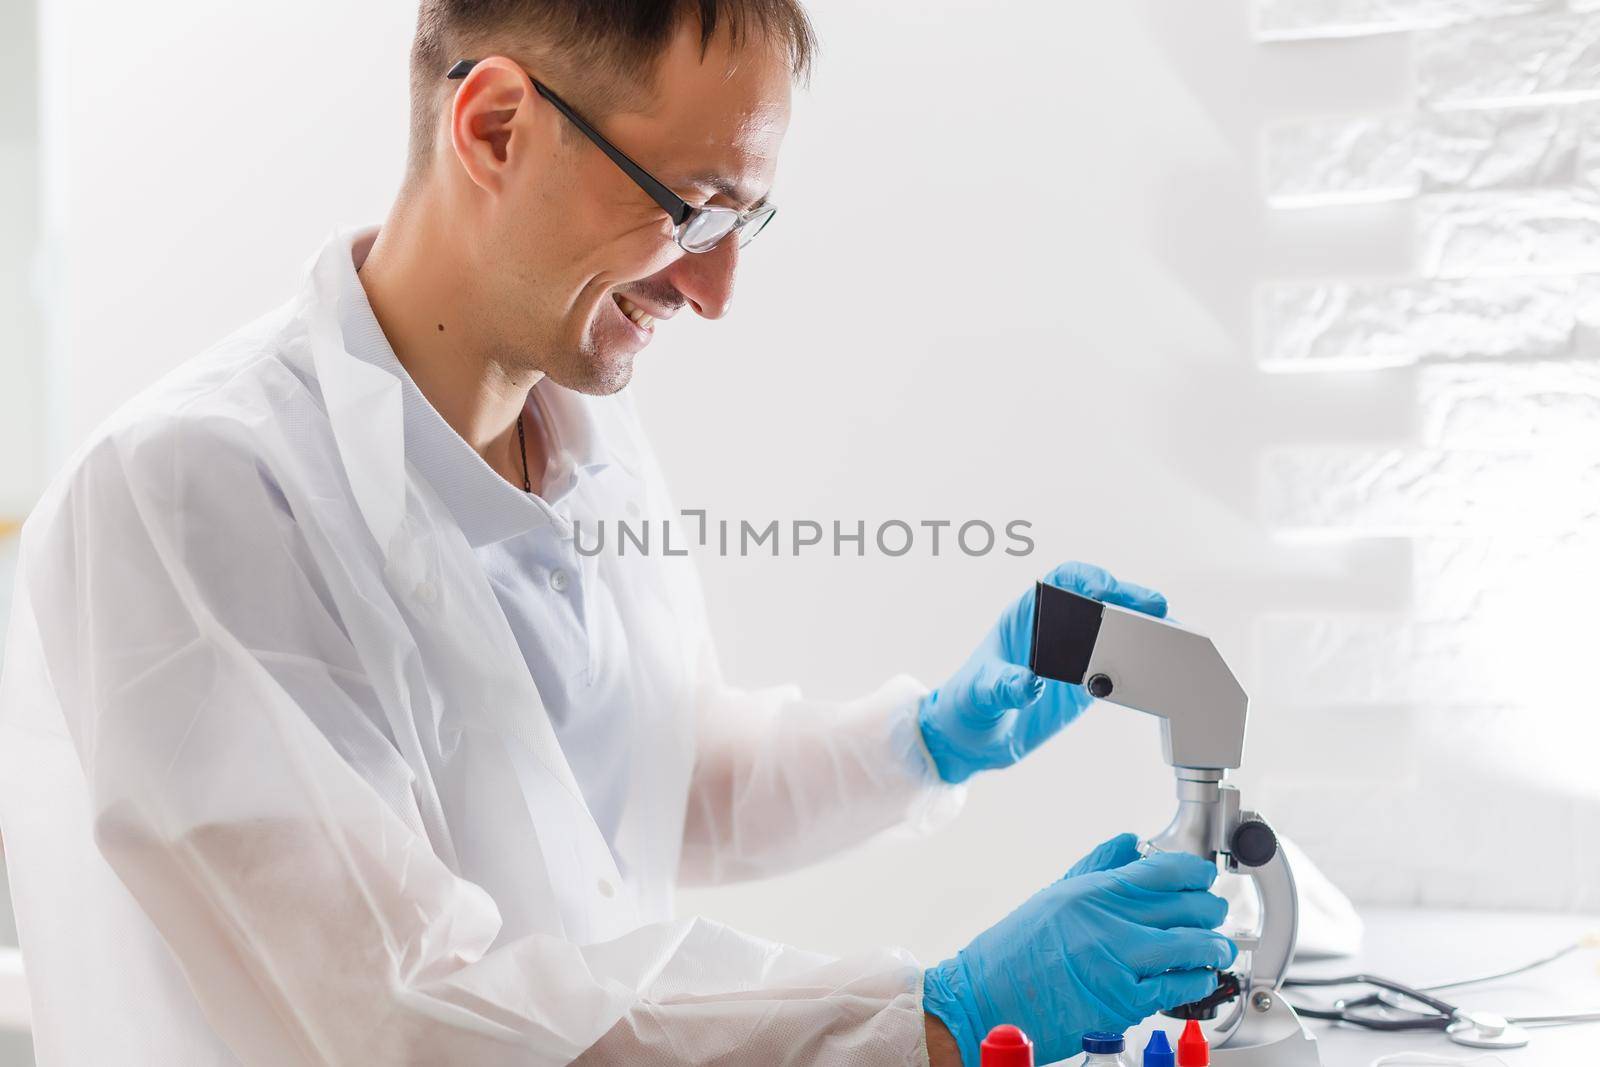 A male doctor or scientist looking through a microscope on a table with laptop computer in background